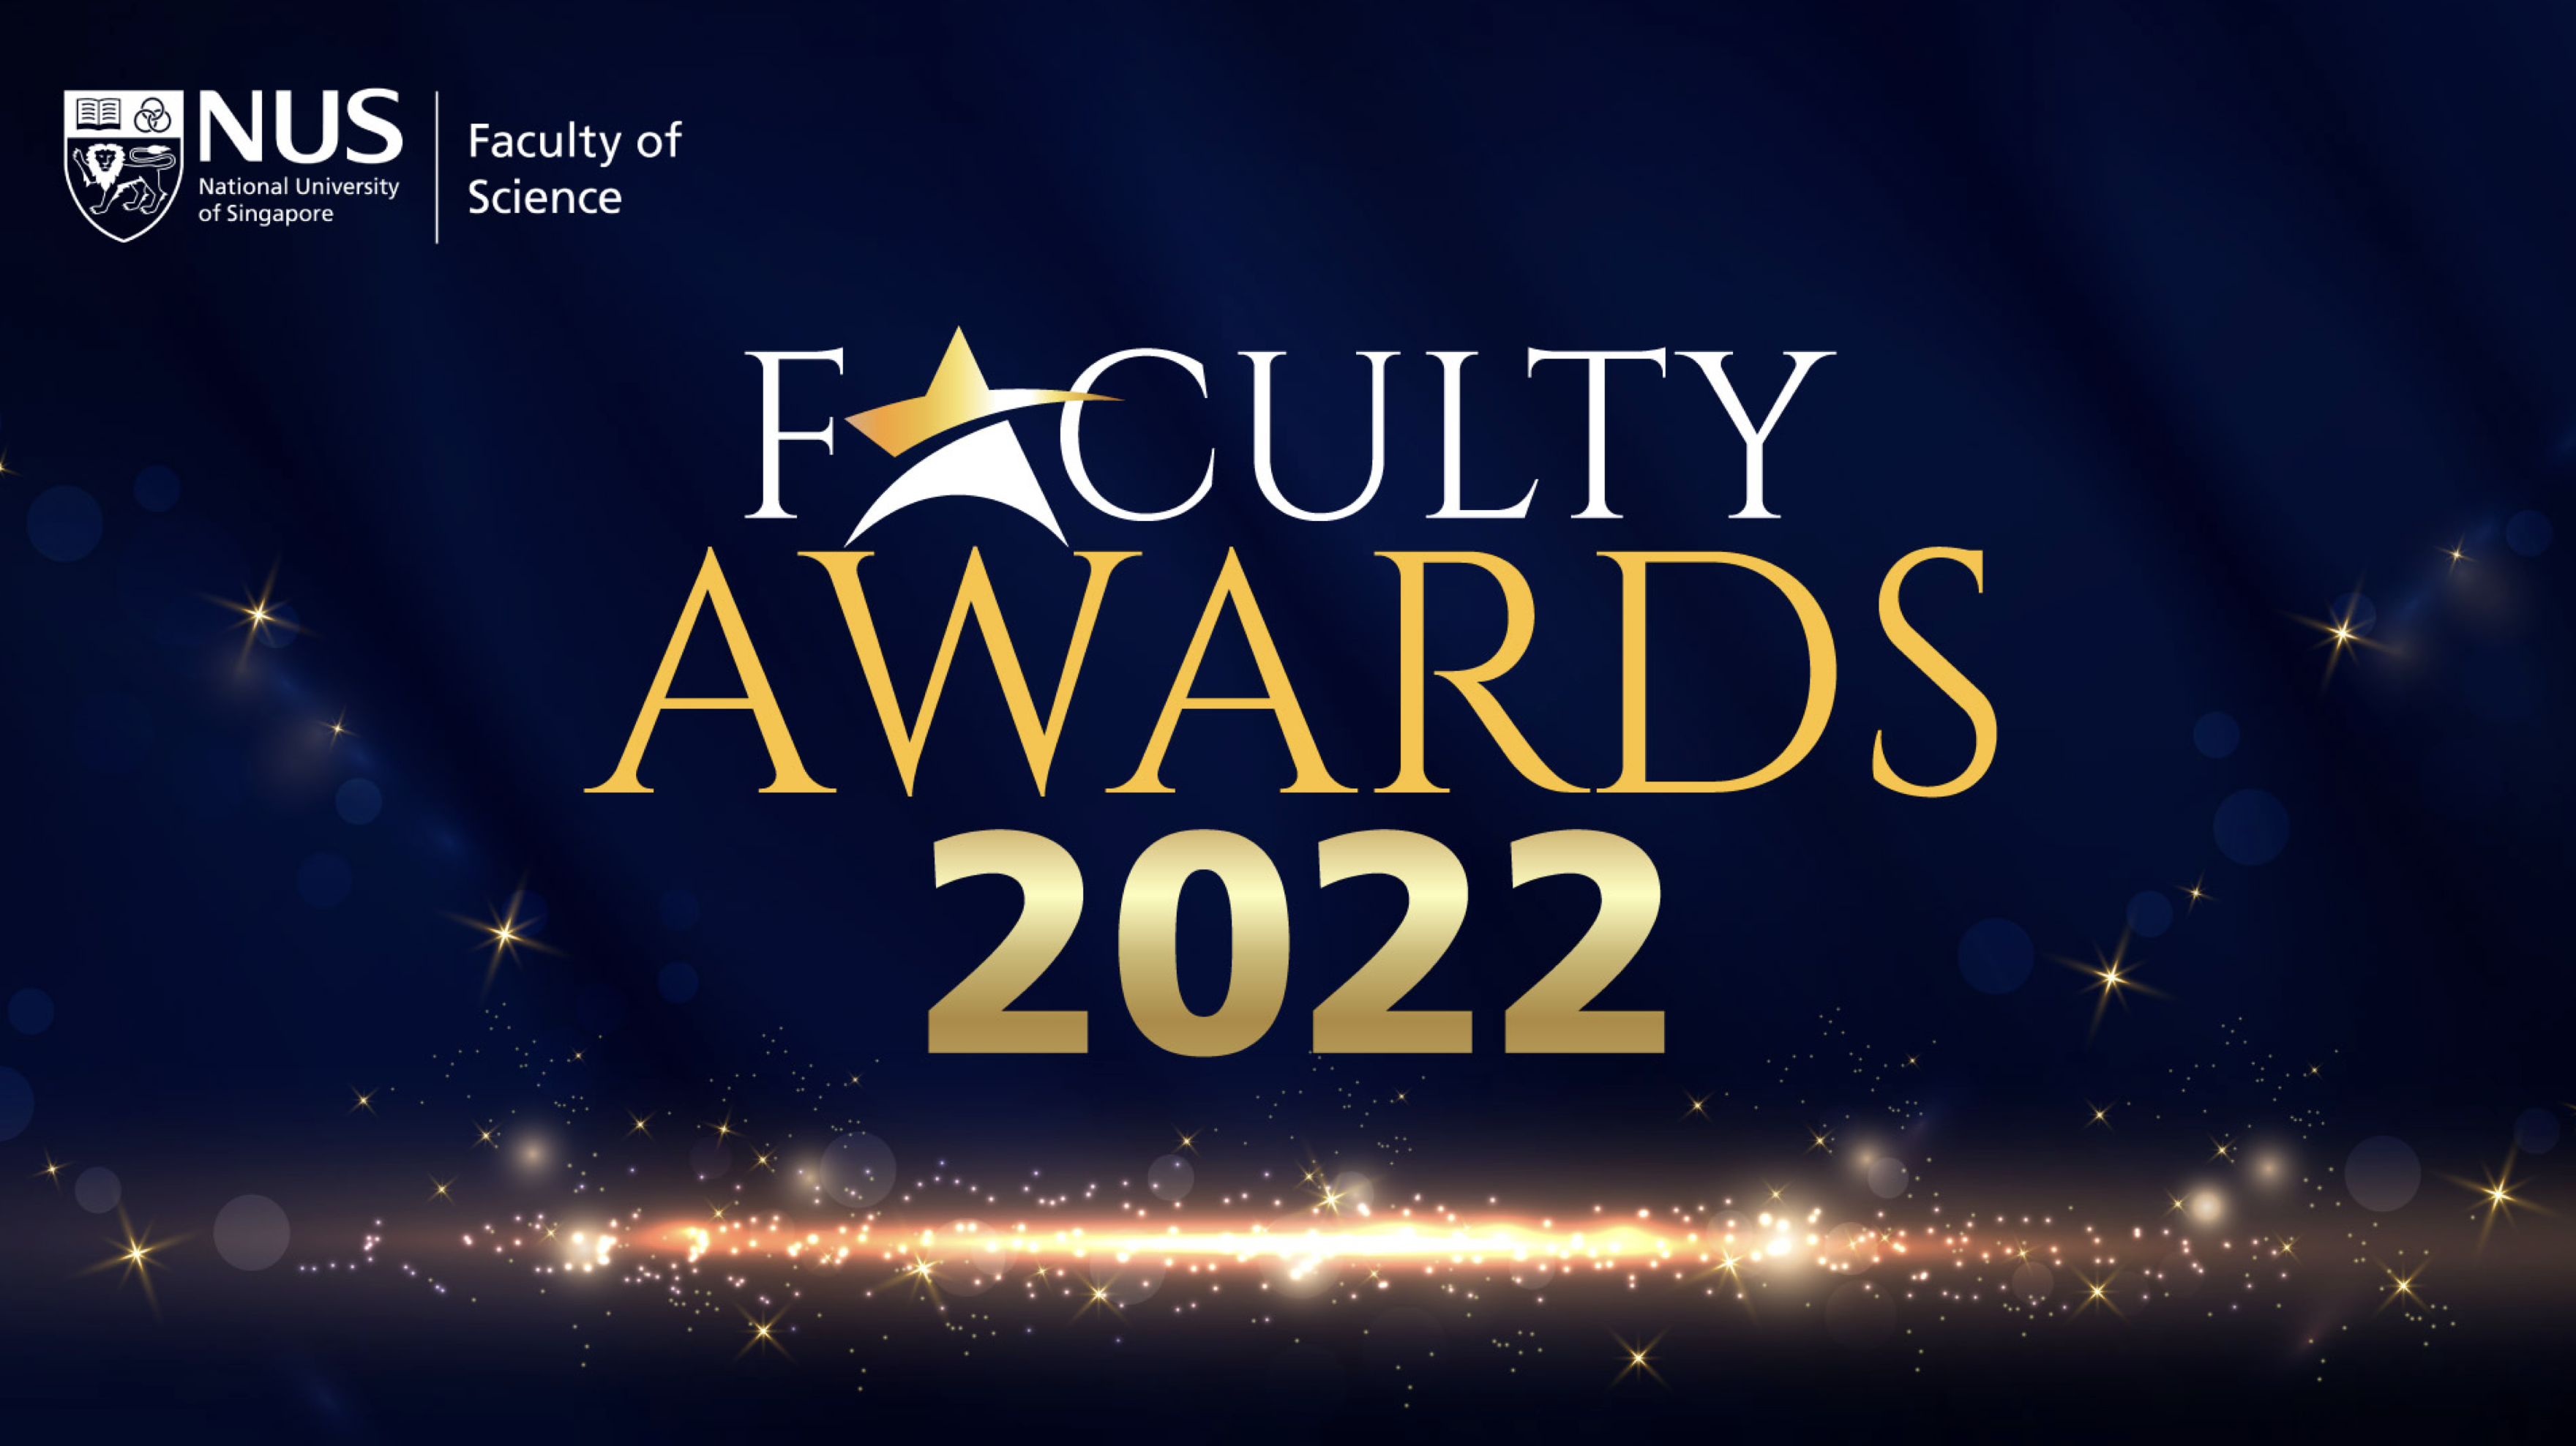 Congratulations to our staff members for winning the Faculty Awards 2022